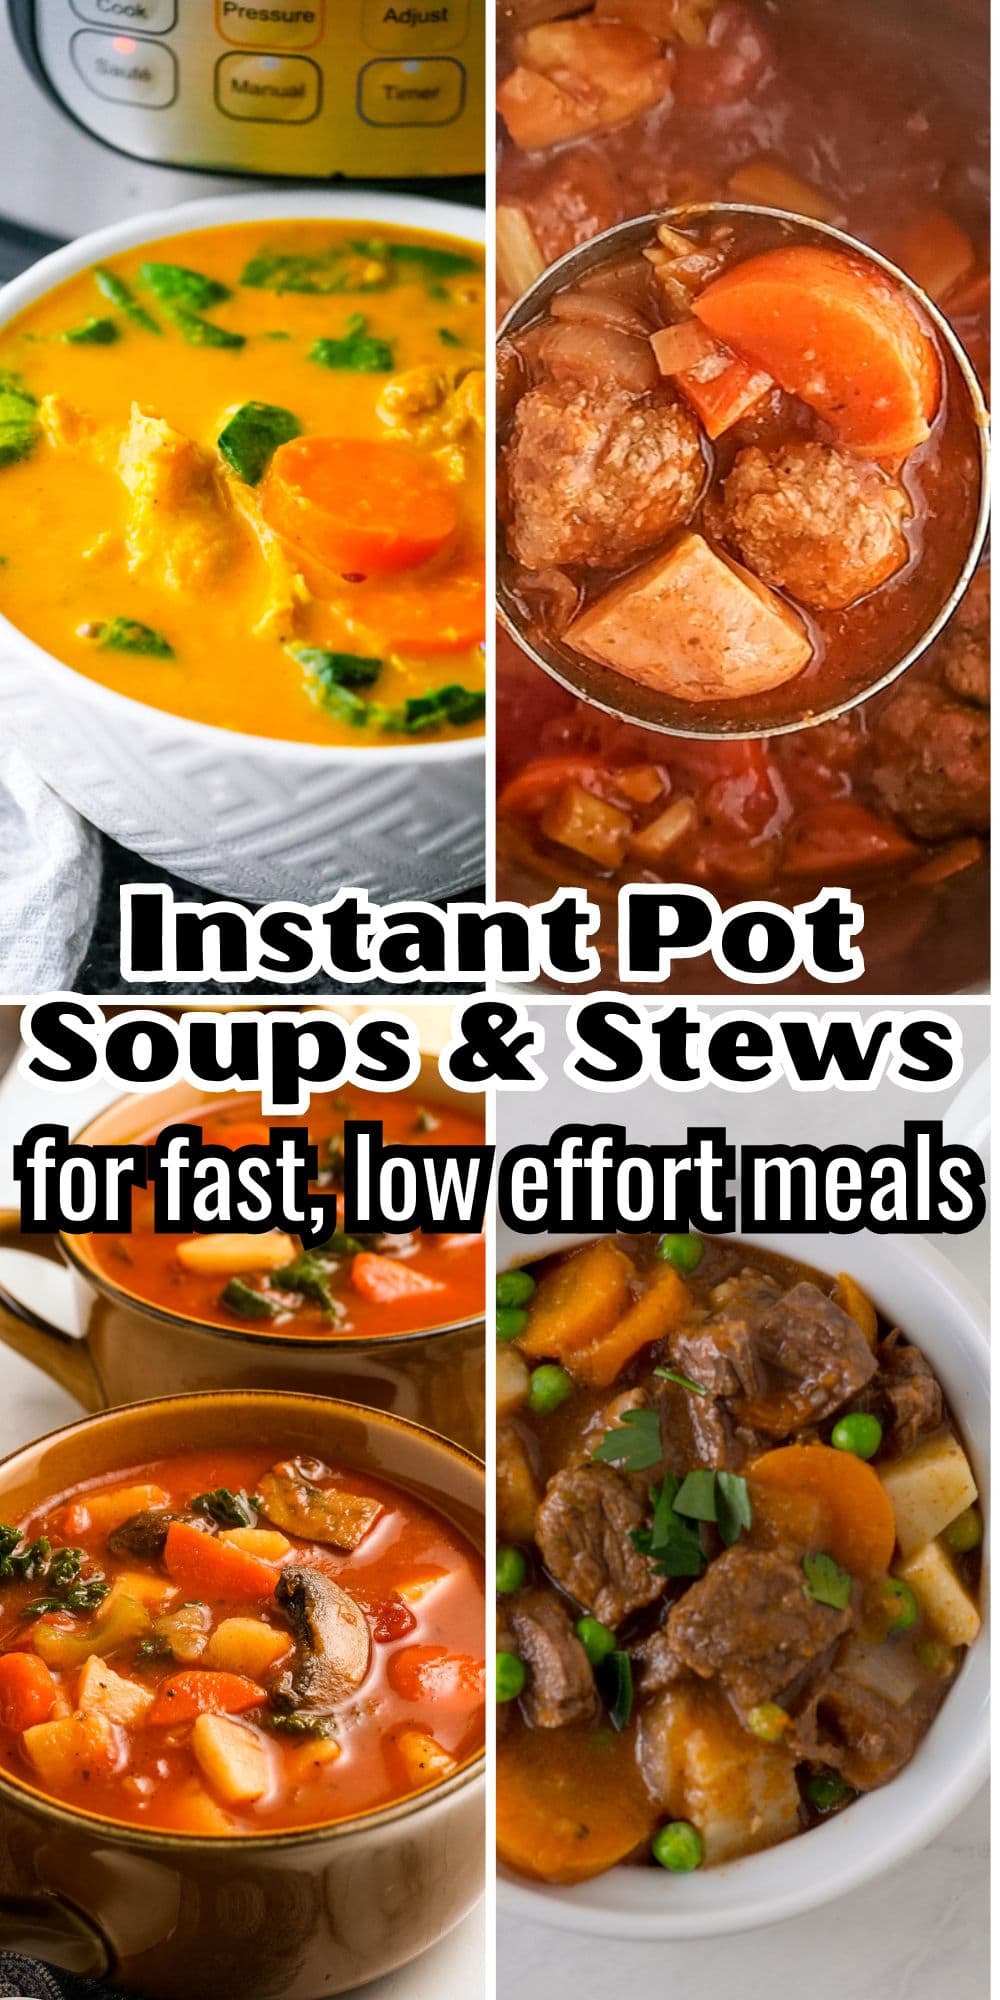 Instant pot soups and stews for fast low effort meals.